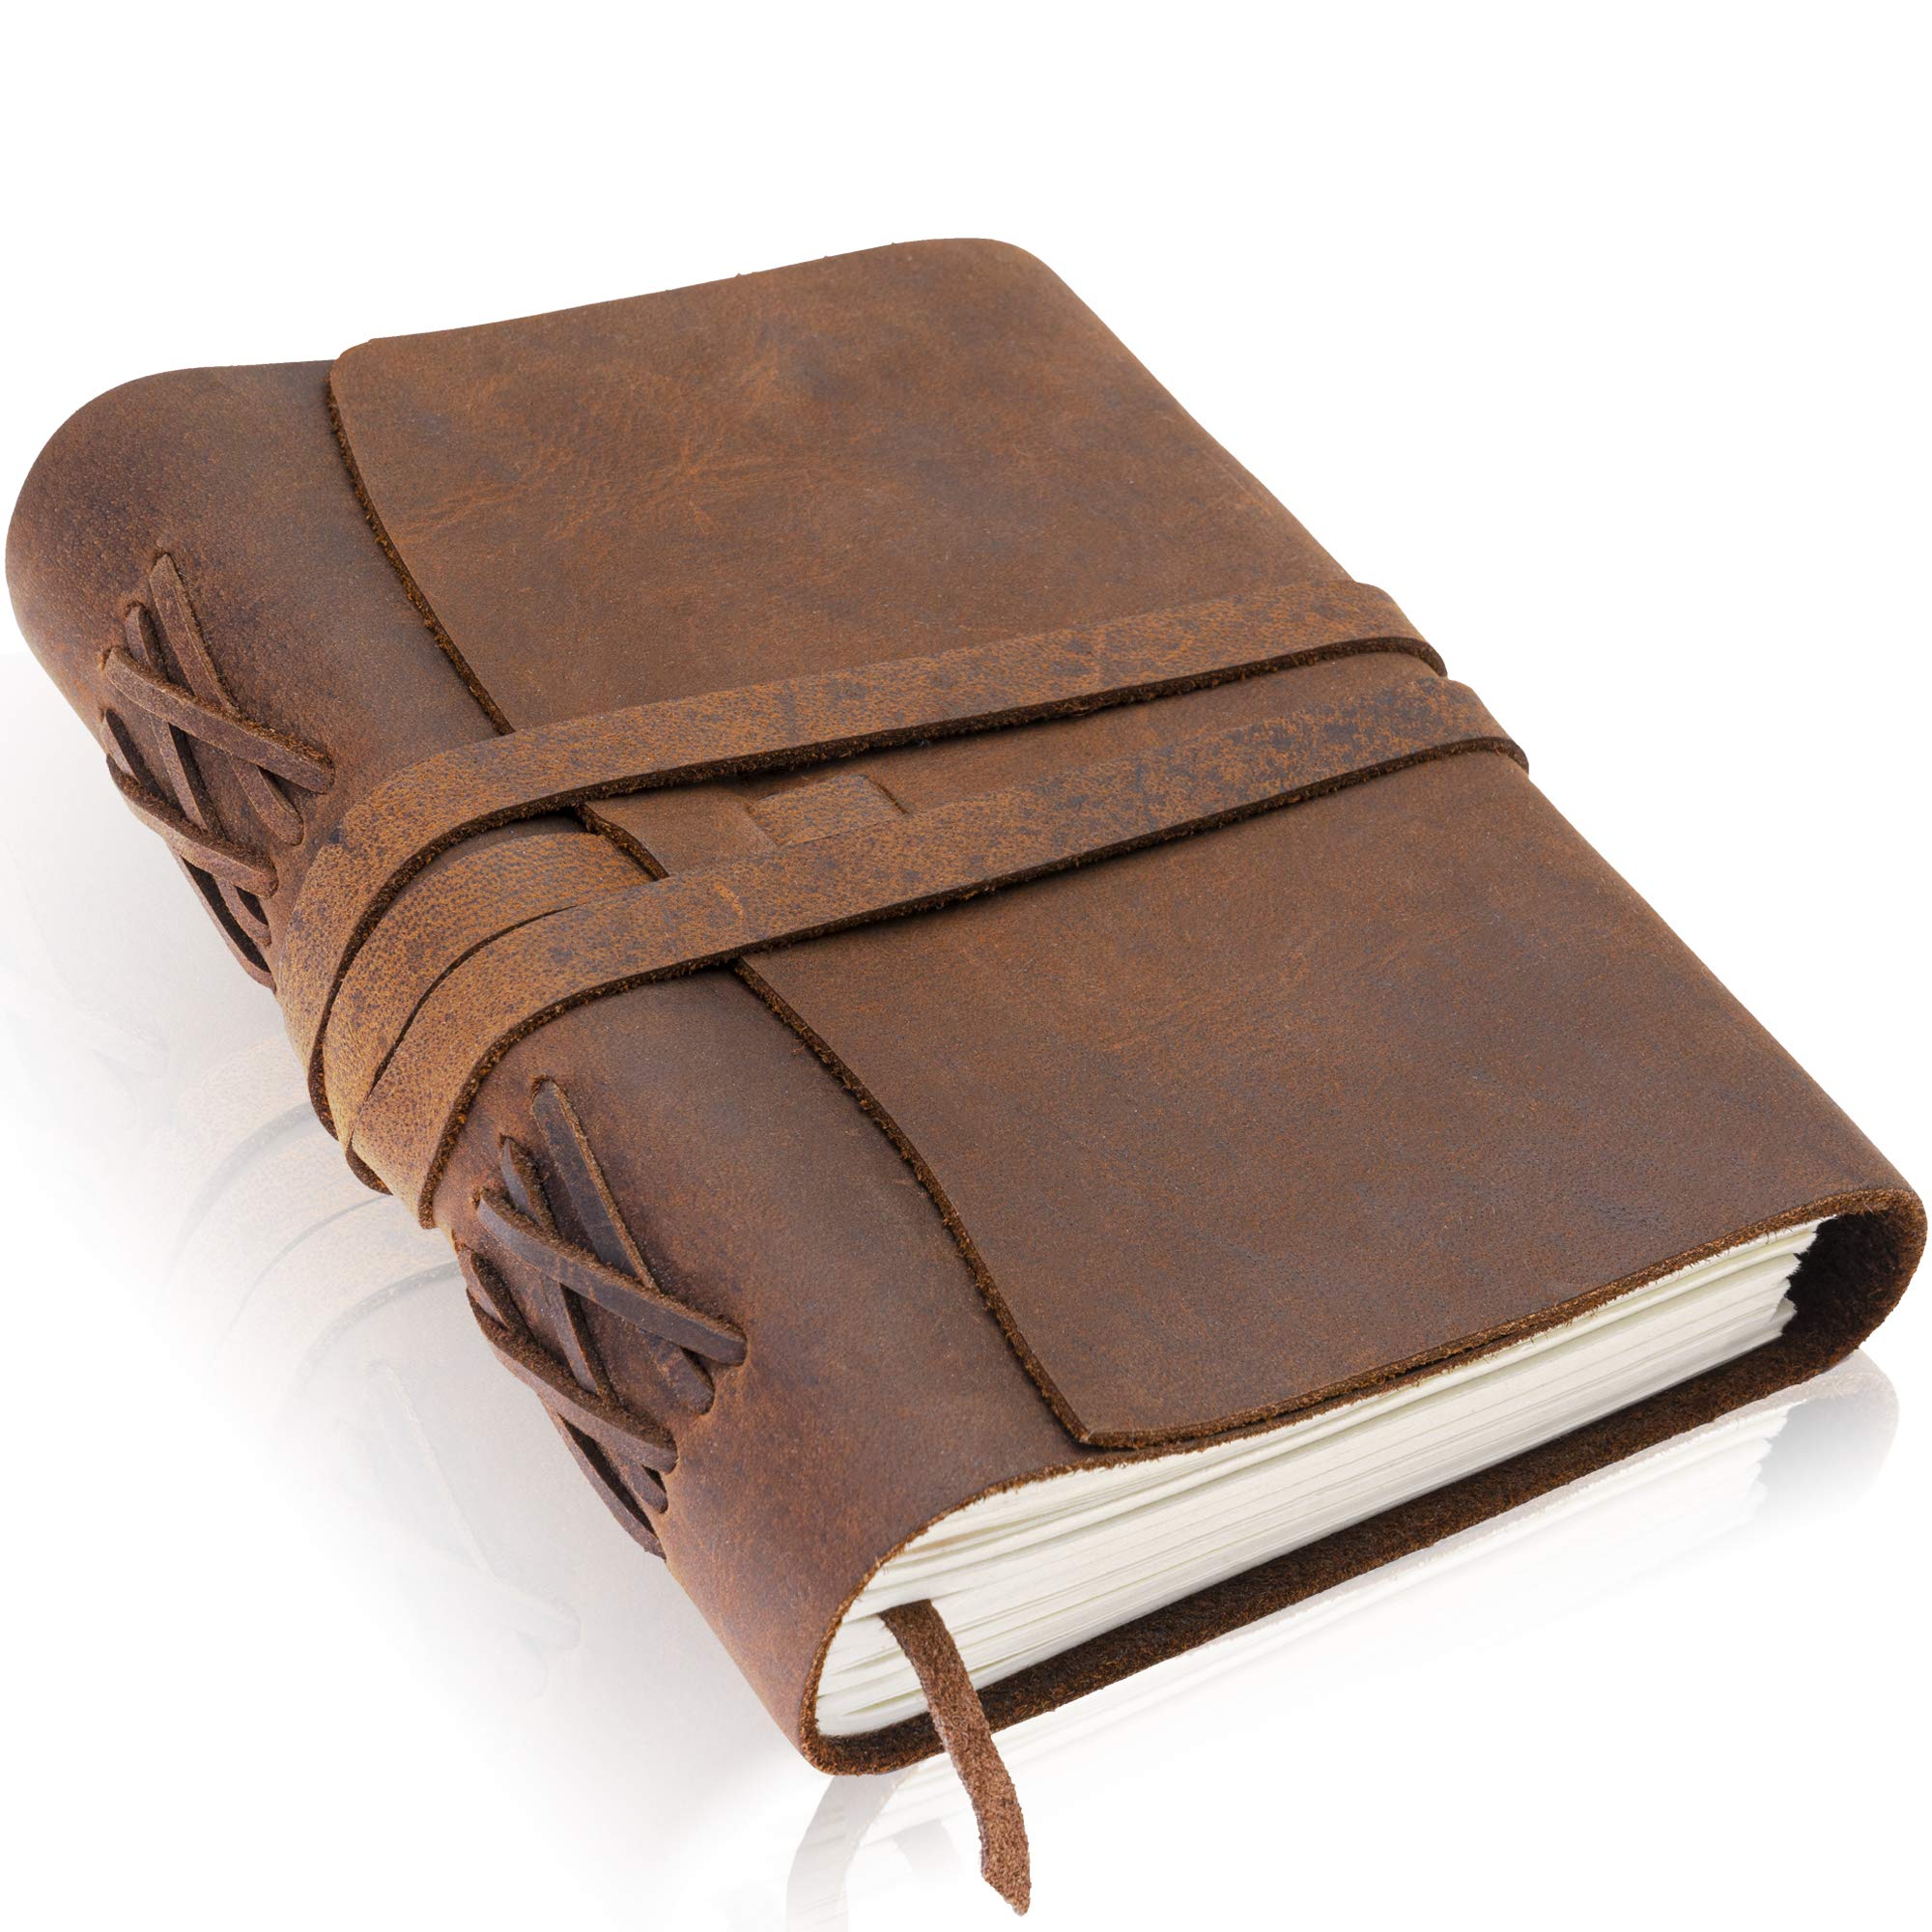 Handmade Leather Pencil Case & Drawing Book - Shop Now